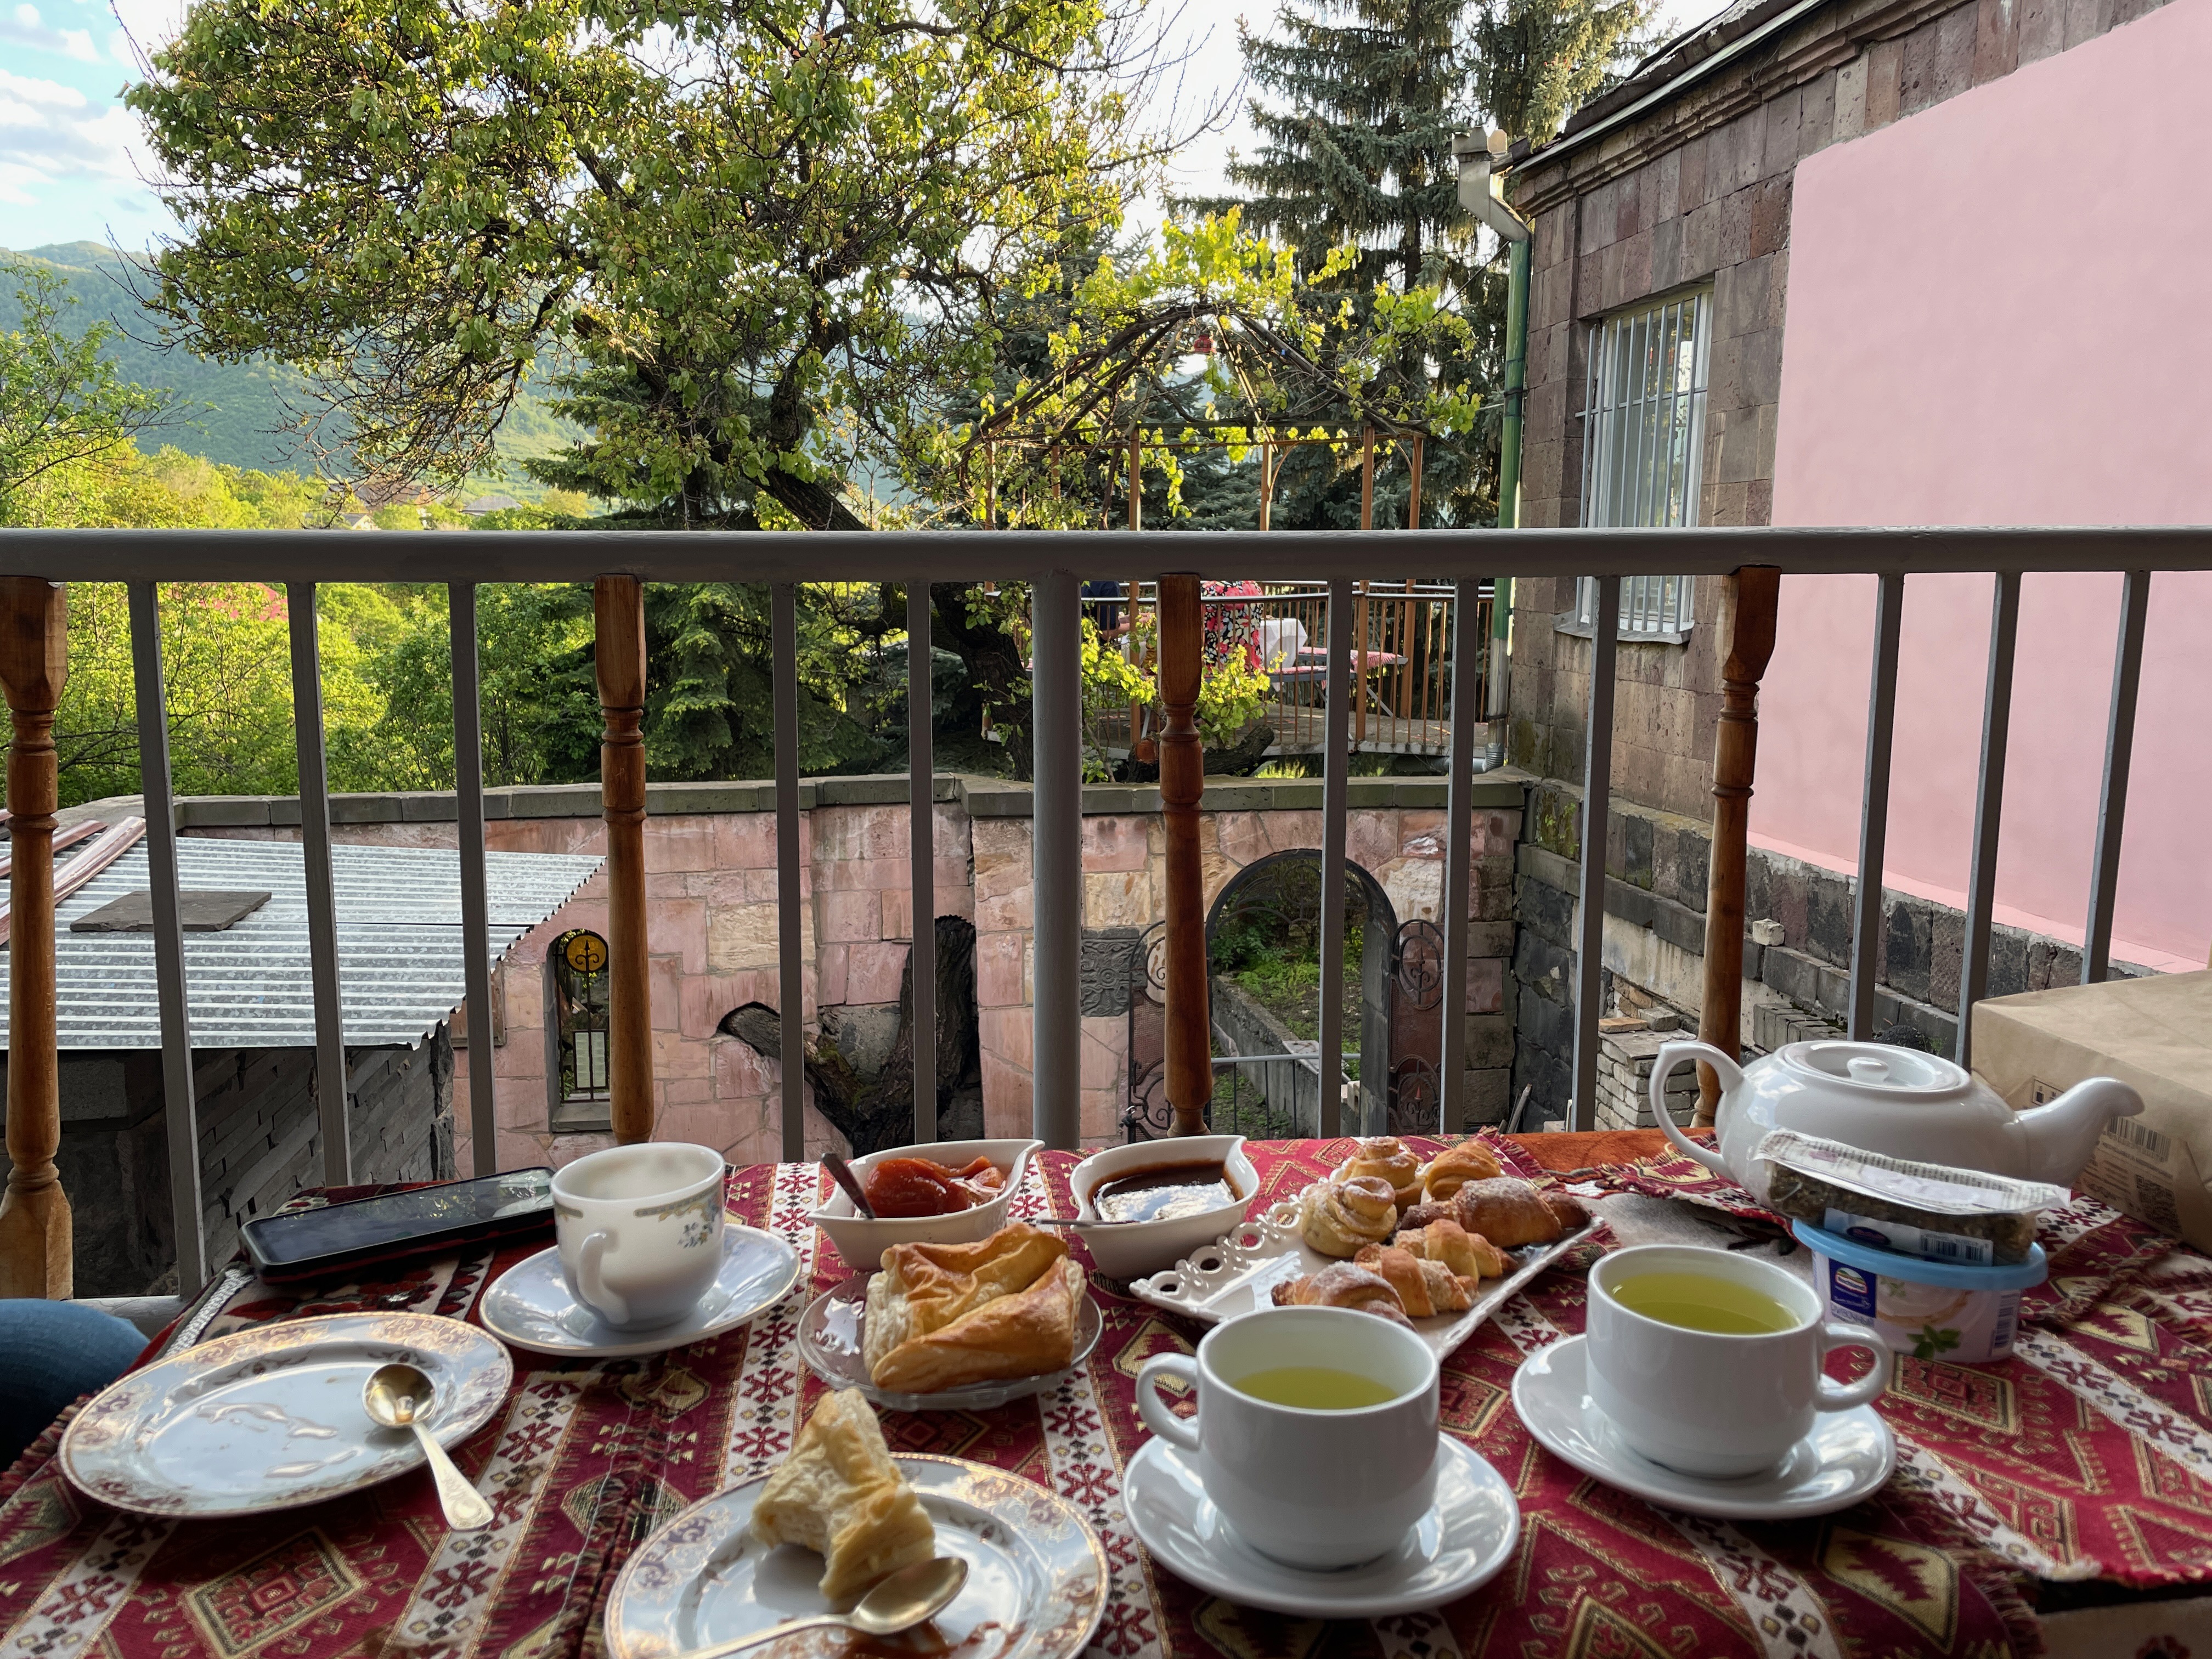 Breakfast and tea in front of a medieval style stone wall